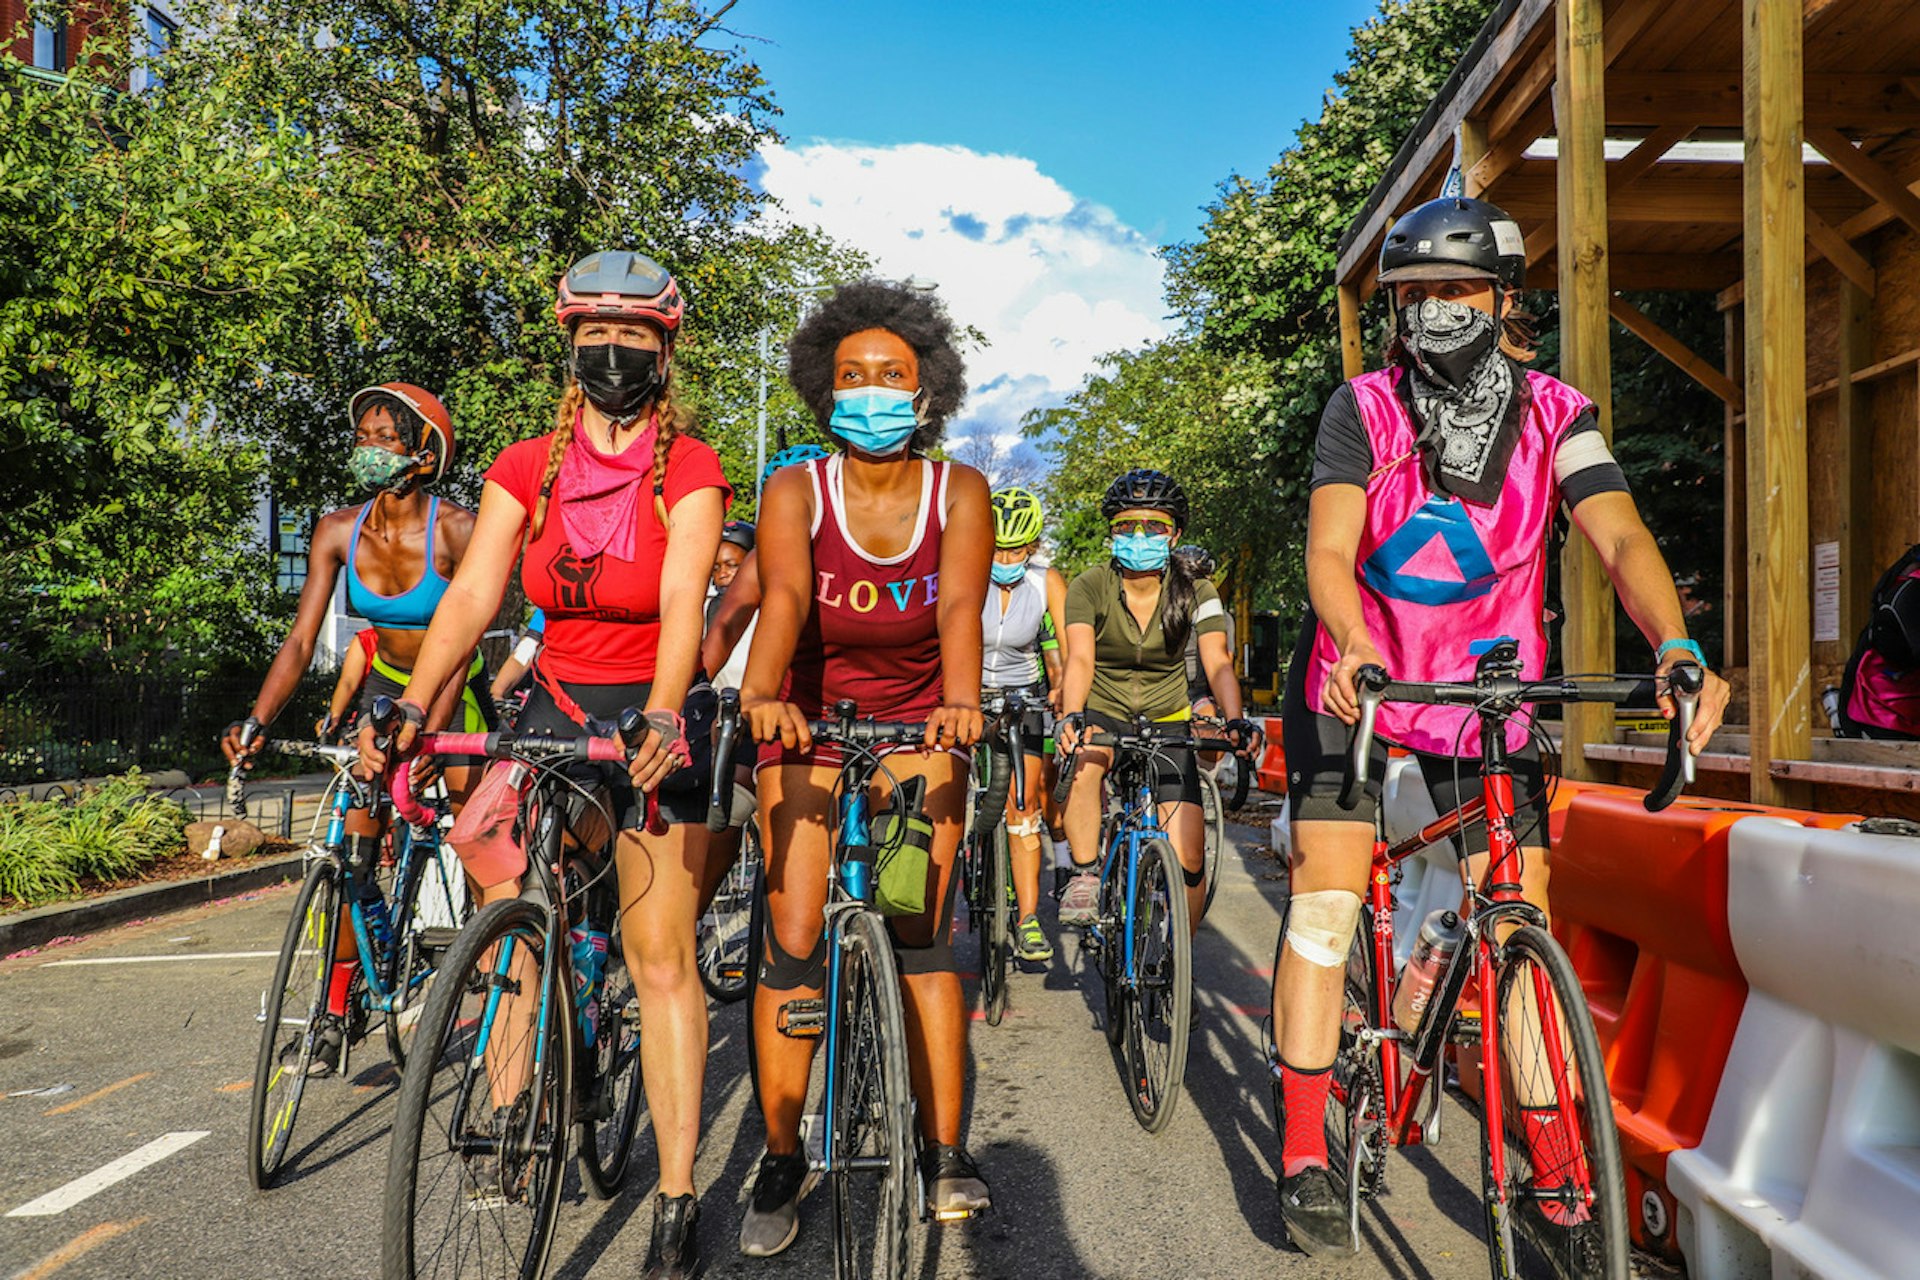 The bike crew riding from NY to DC for Black lives